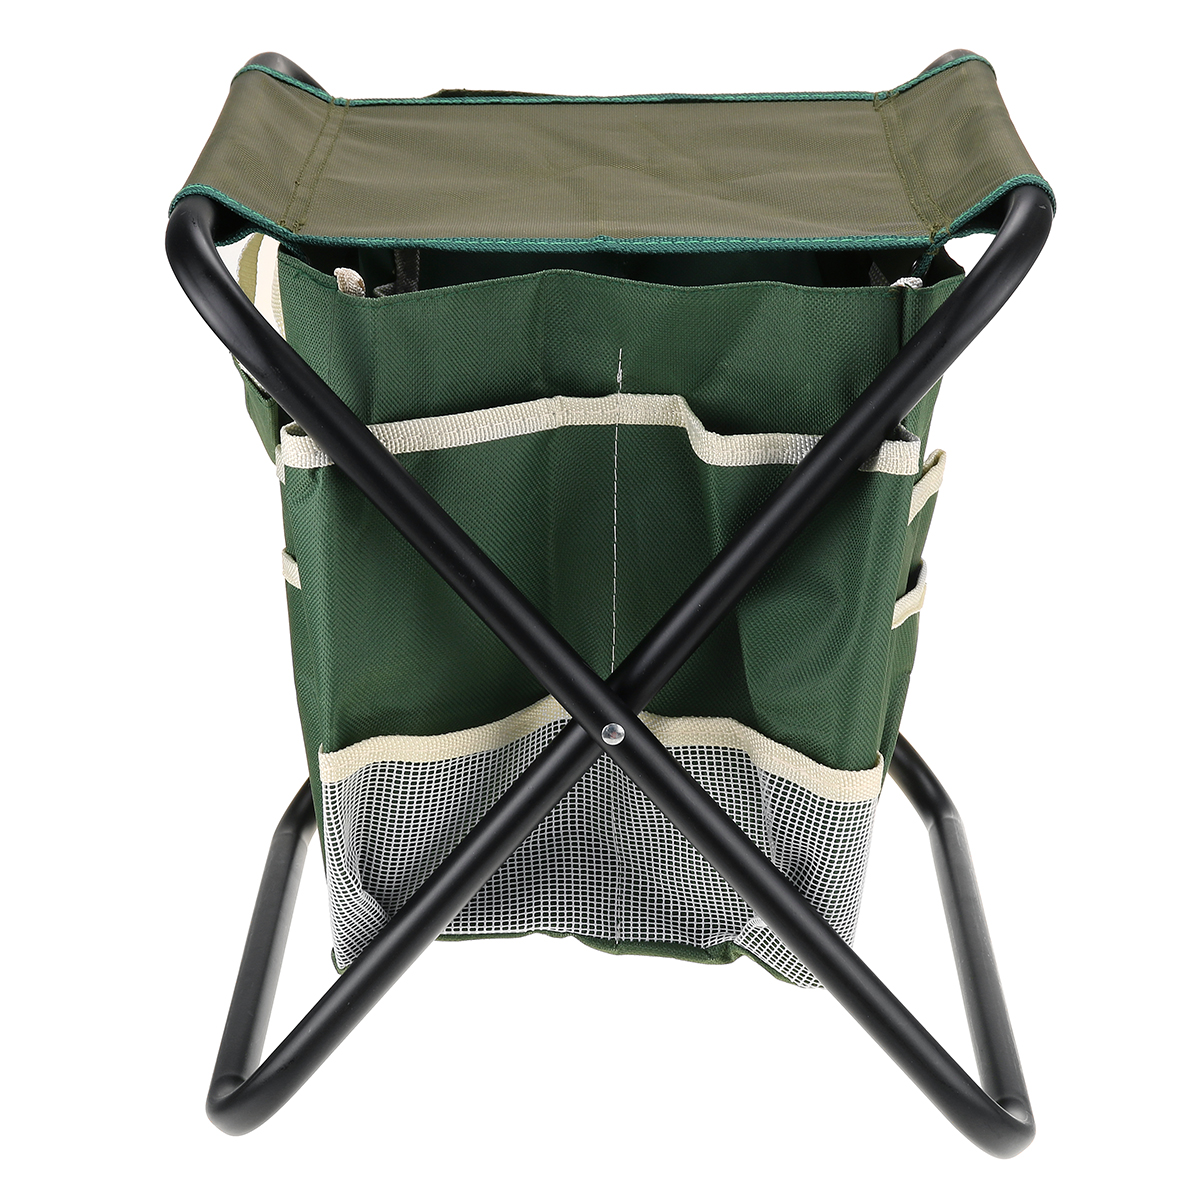 2-in-1-Folding-Chair-Fishing-Seat-with-Storage-Bag-Ultralight-Aluminum-Stool-Home-Furniture-Fishing--1792092-5